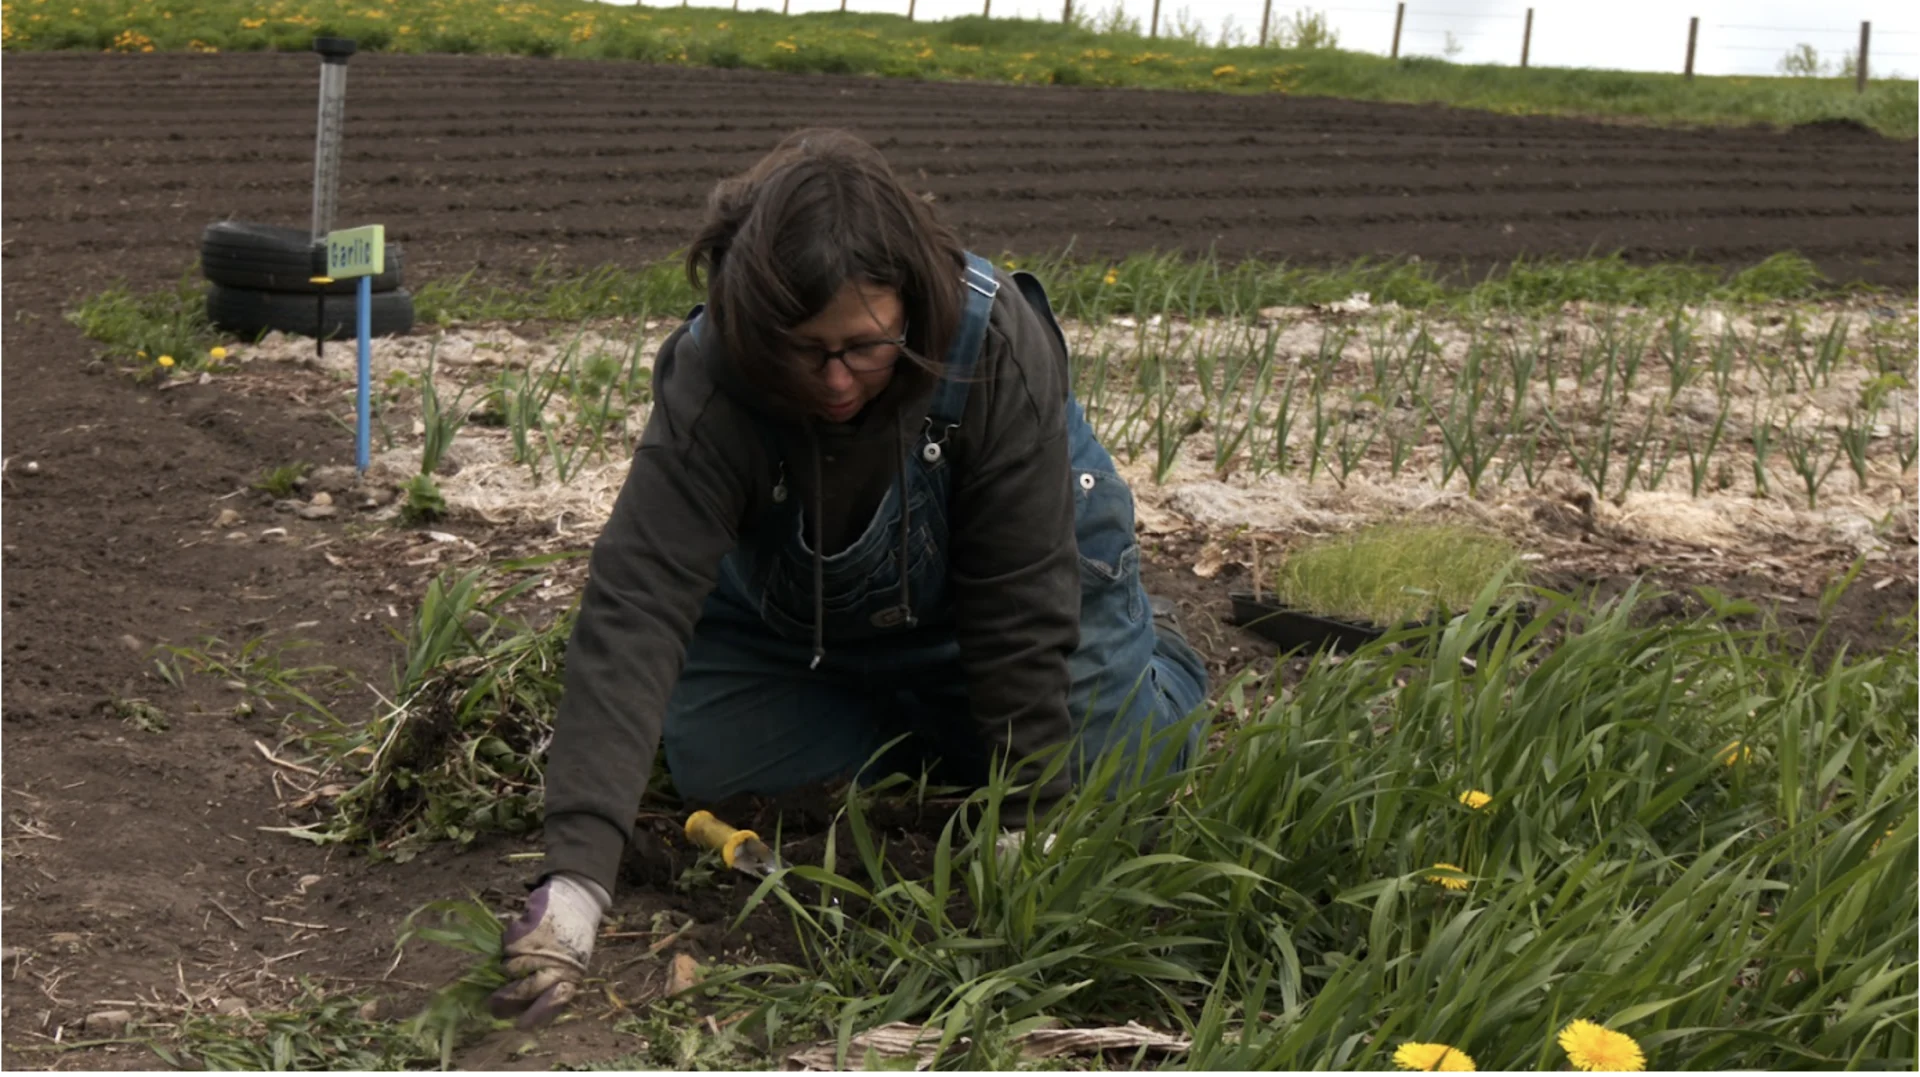 CONNOR O'DONOVAN: Alberta Telfer invites customers out to her farm so they can get their hands dirty themselves to help “deepen their knowledge of their food and where it comes from” and explore how vegetables grown locally might taste different